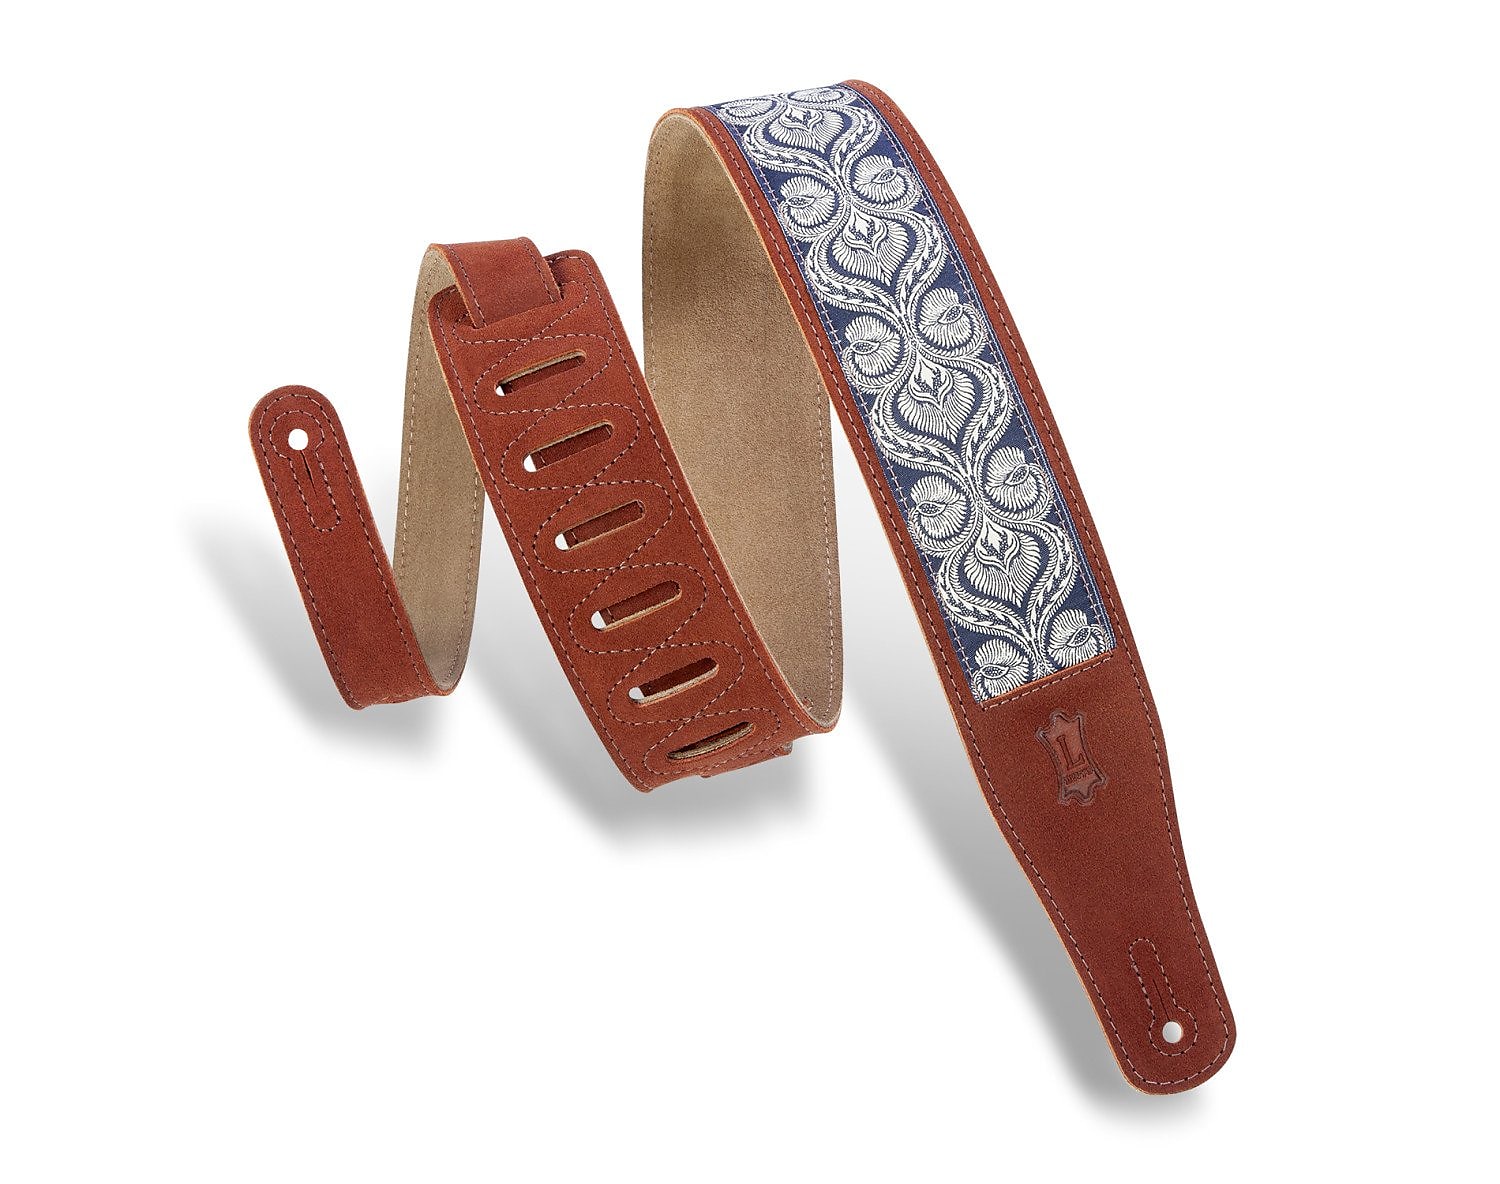 Levy's 2.5" Jacquard Embellish Suede Guitar Strap - Rust